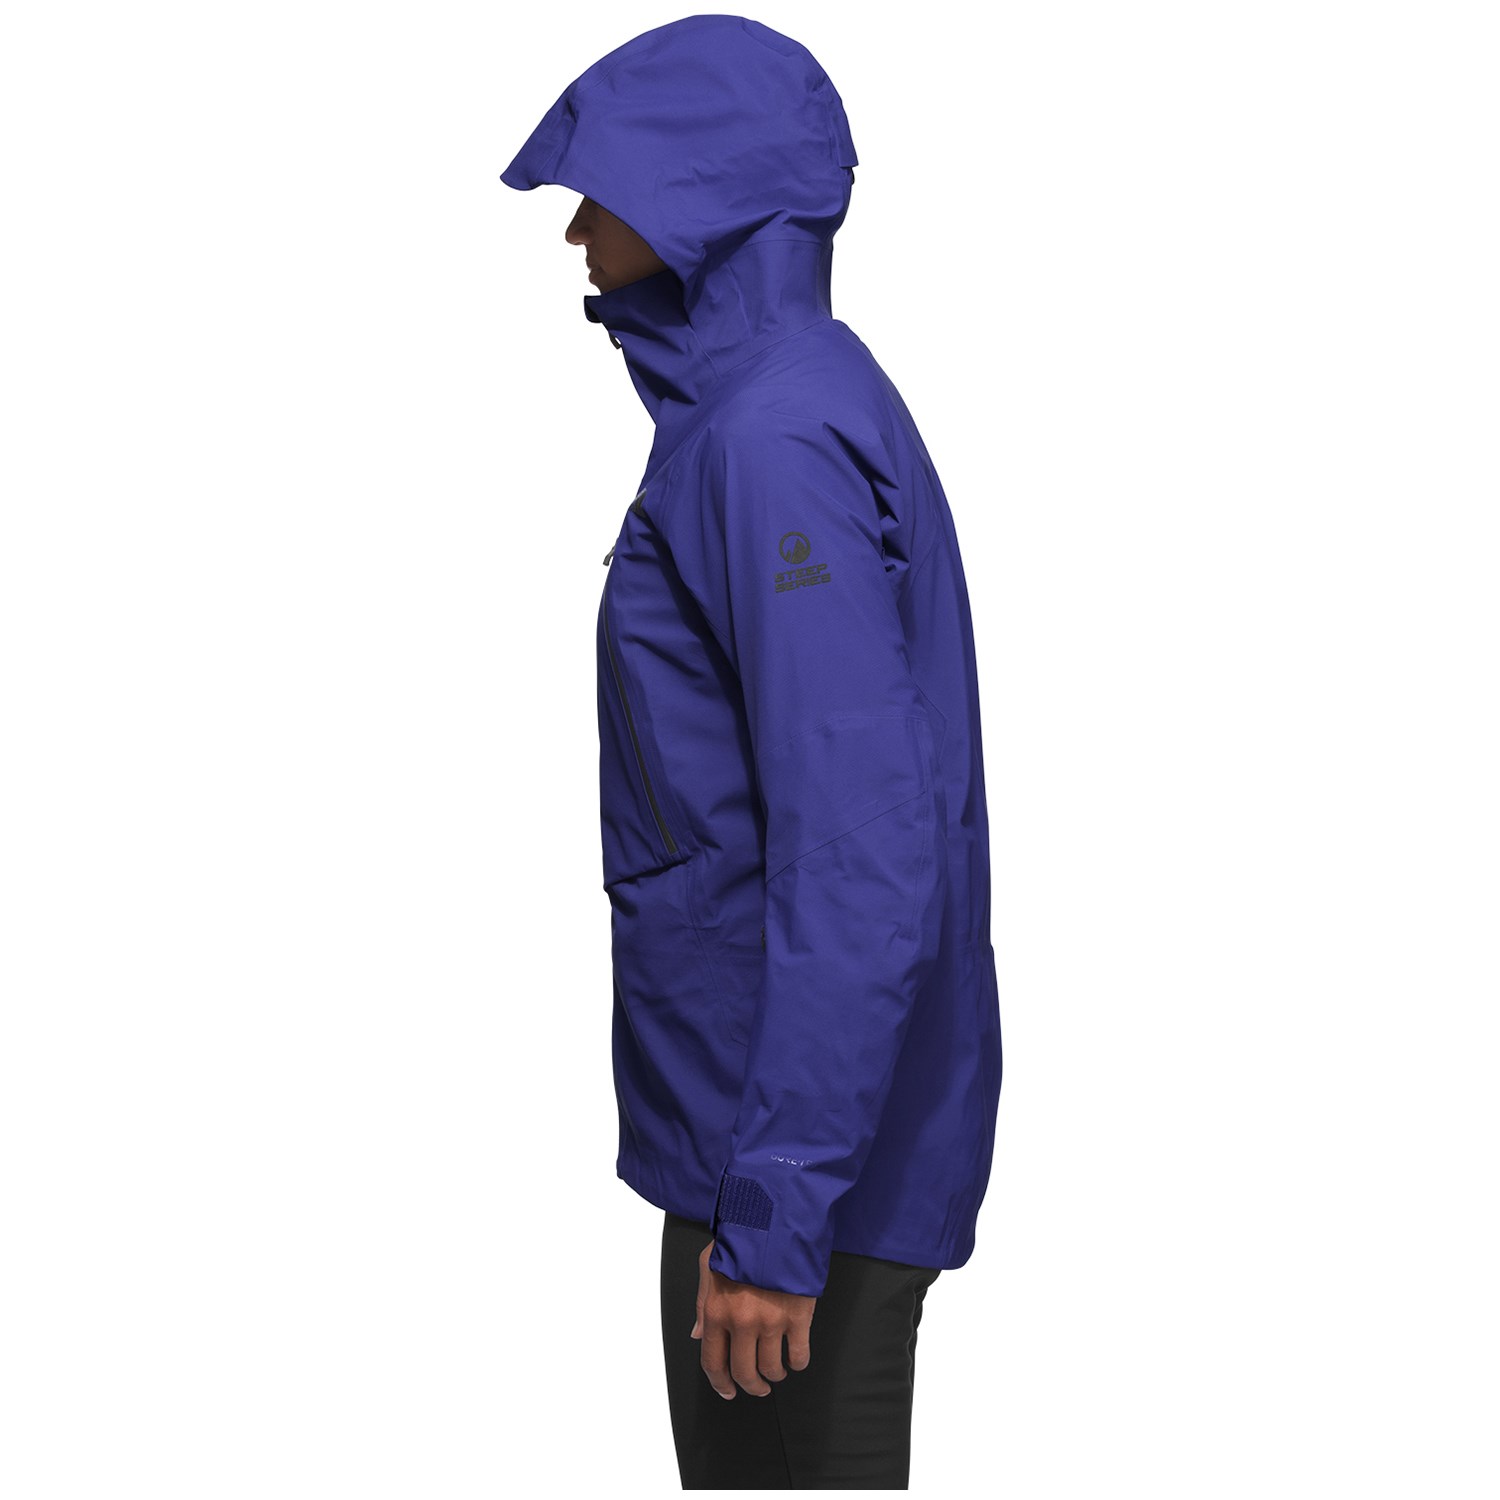 north face purist triclimate